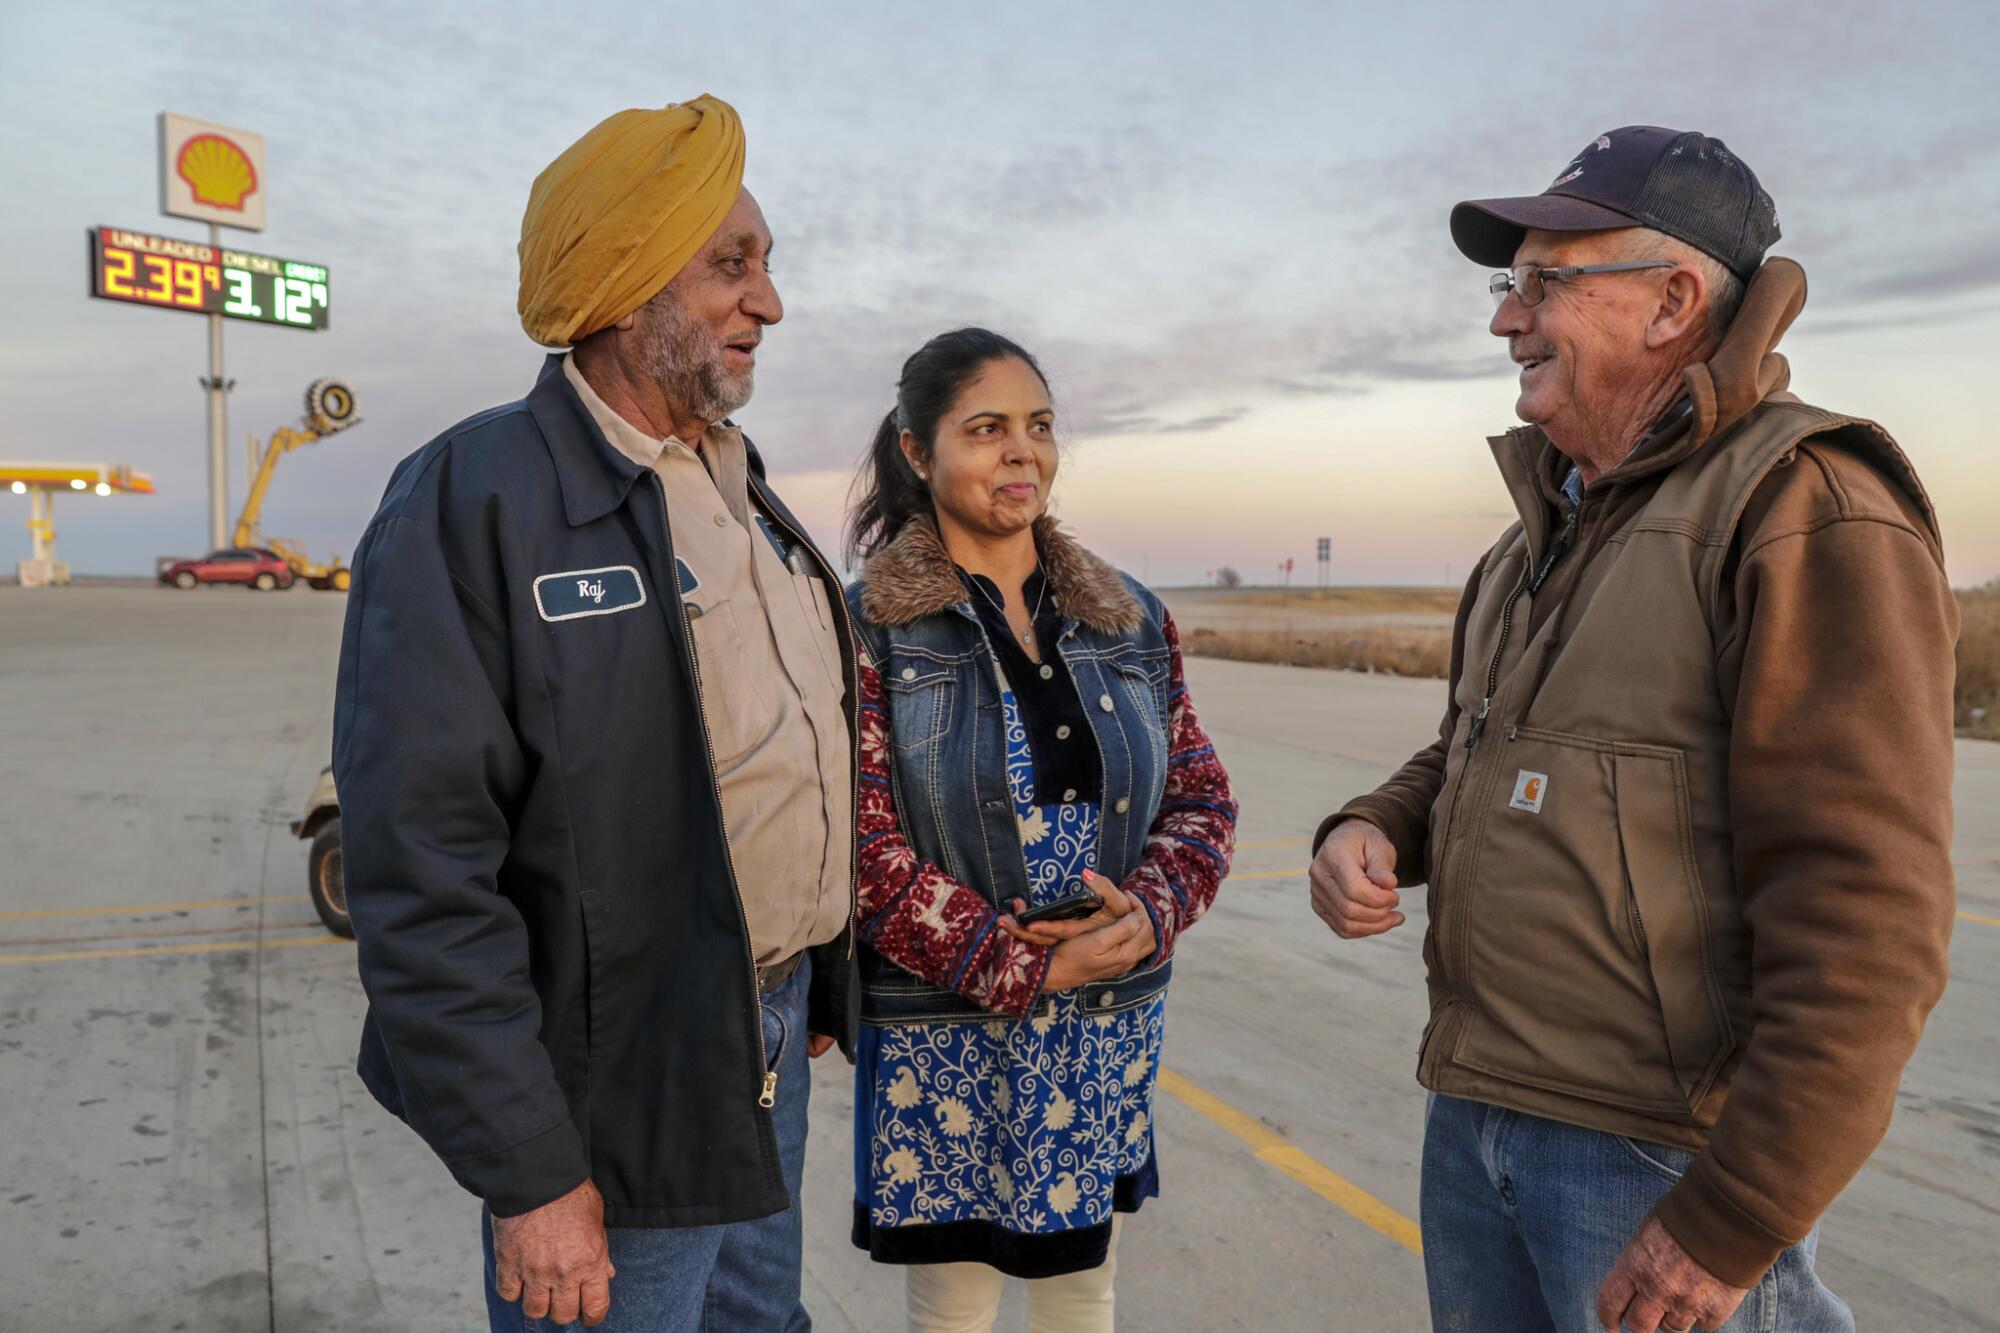 Truck Stop 40 owners Raj Chhoker, left, and his wife, Harpreet Chhoker, chat with their neighbor Kenny Drake.